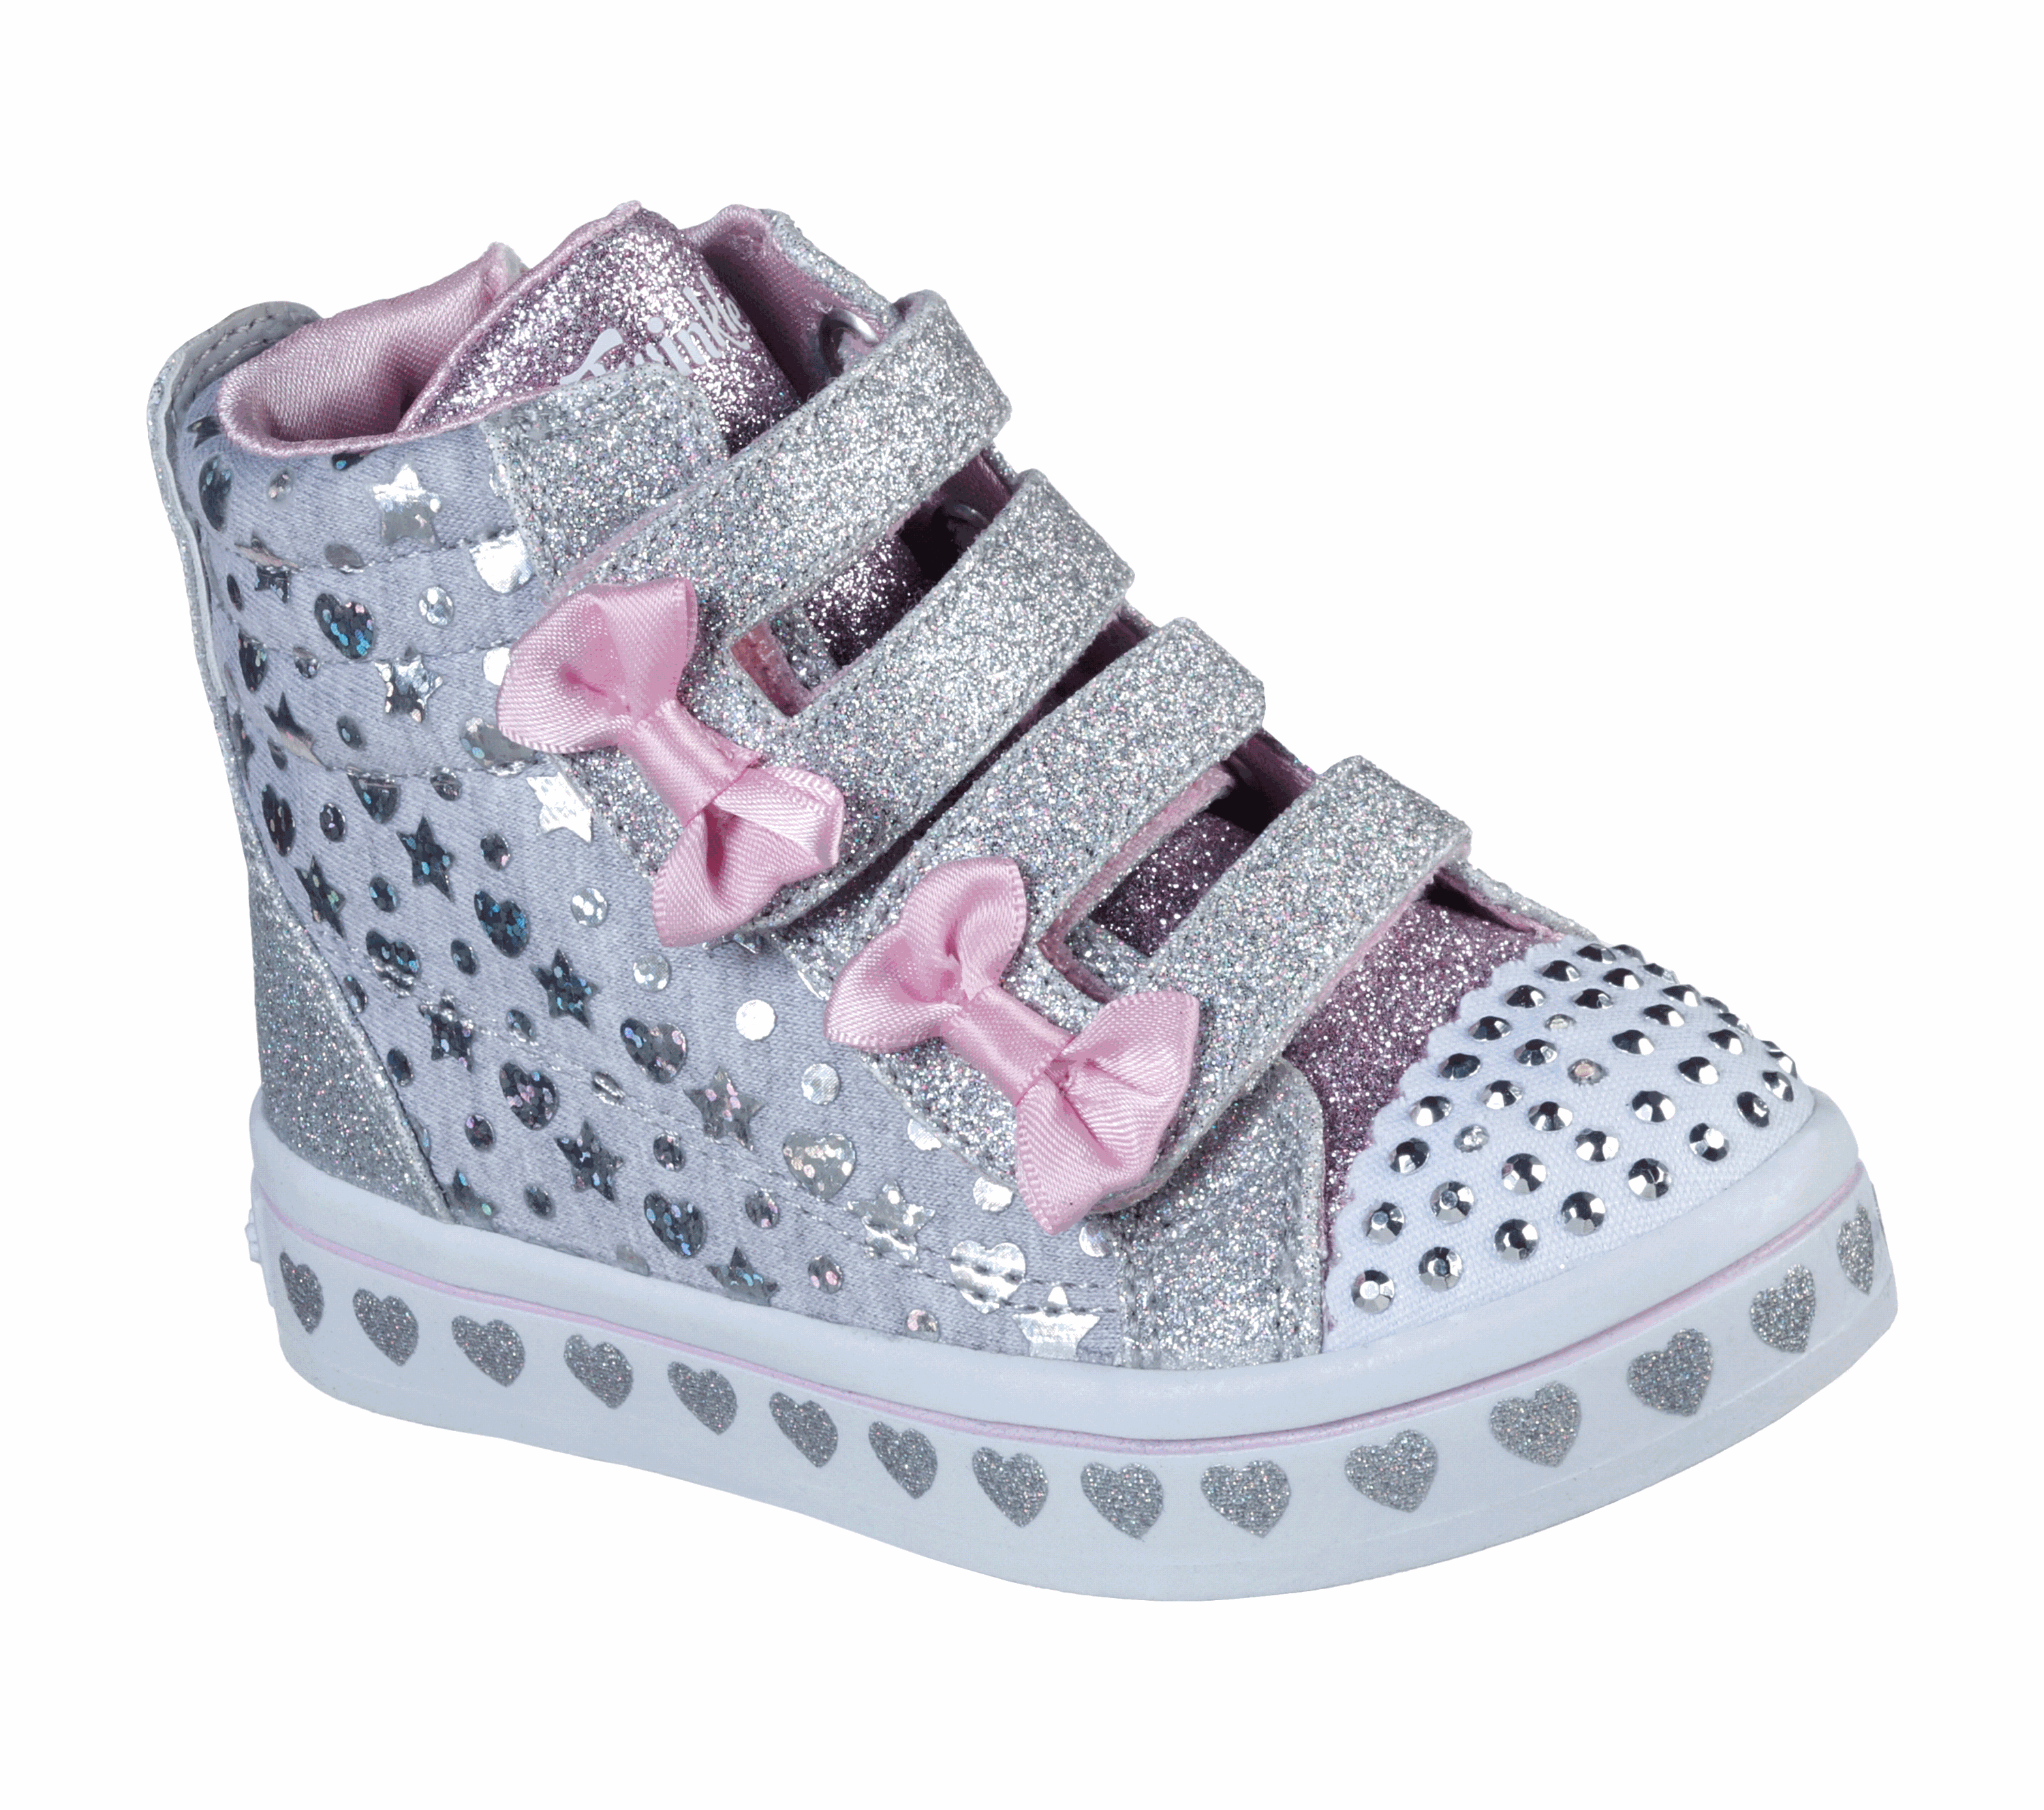 skechers twinkle toes south africa